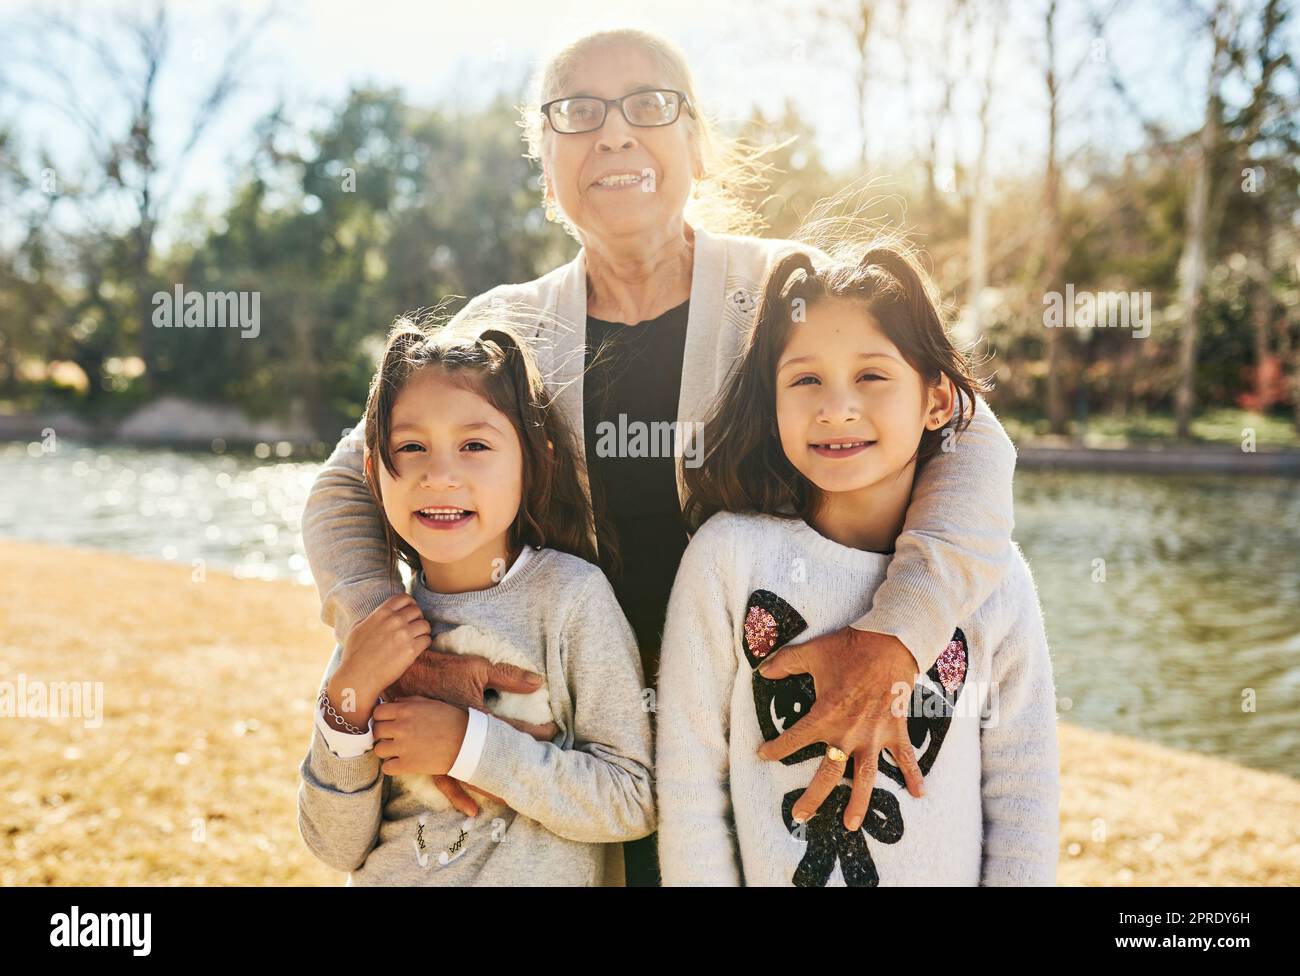 We have so much to learn from our grandmother. Portrait of a grandmother spending time with her adorable granddaughters outdoors. Stock Photo